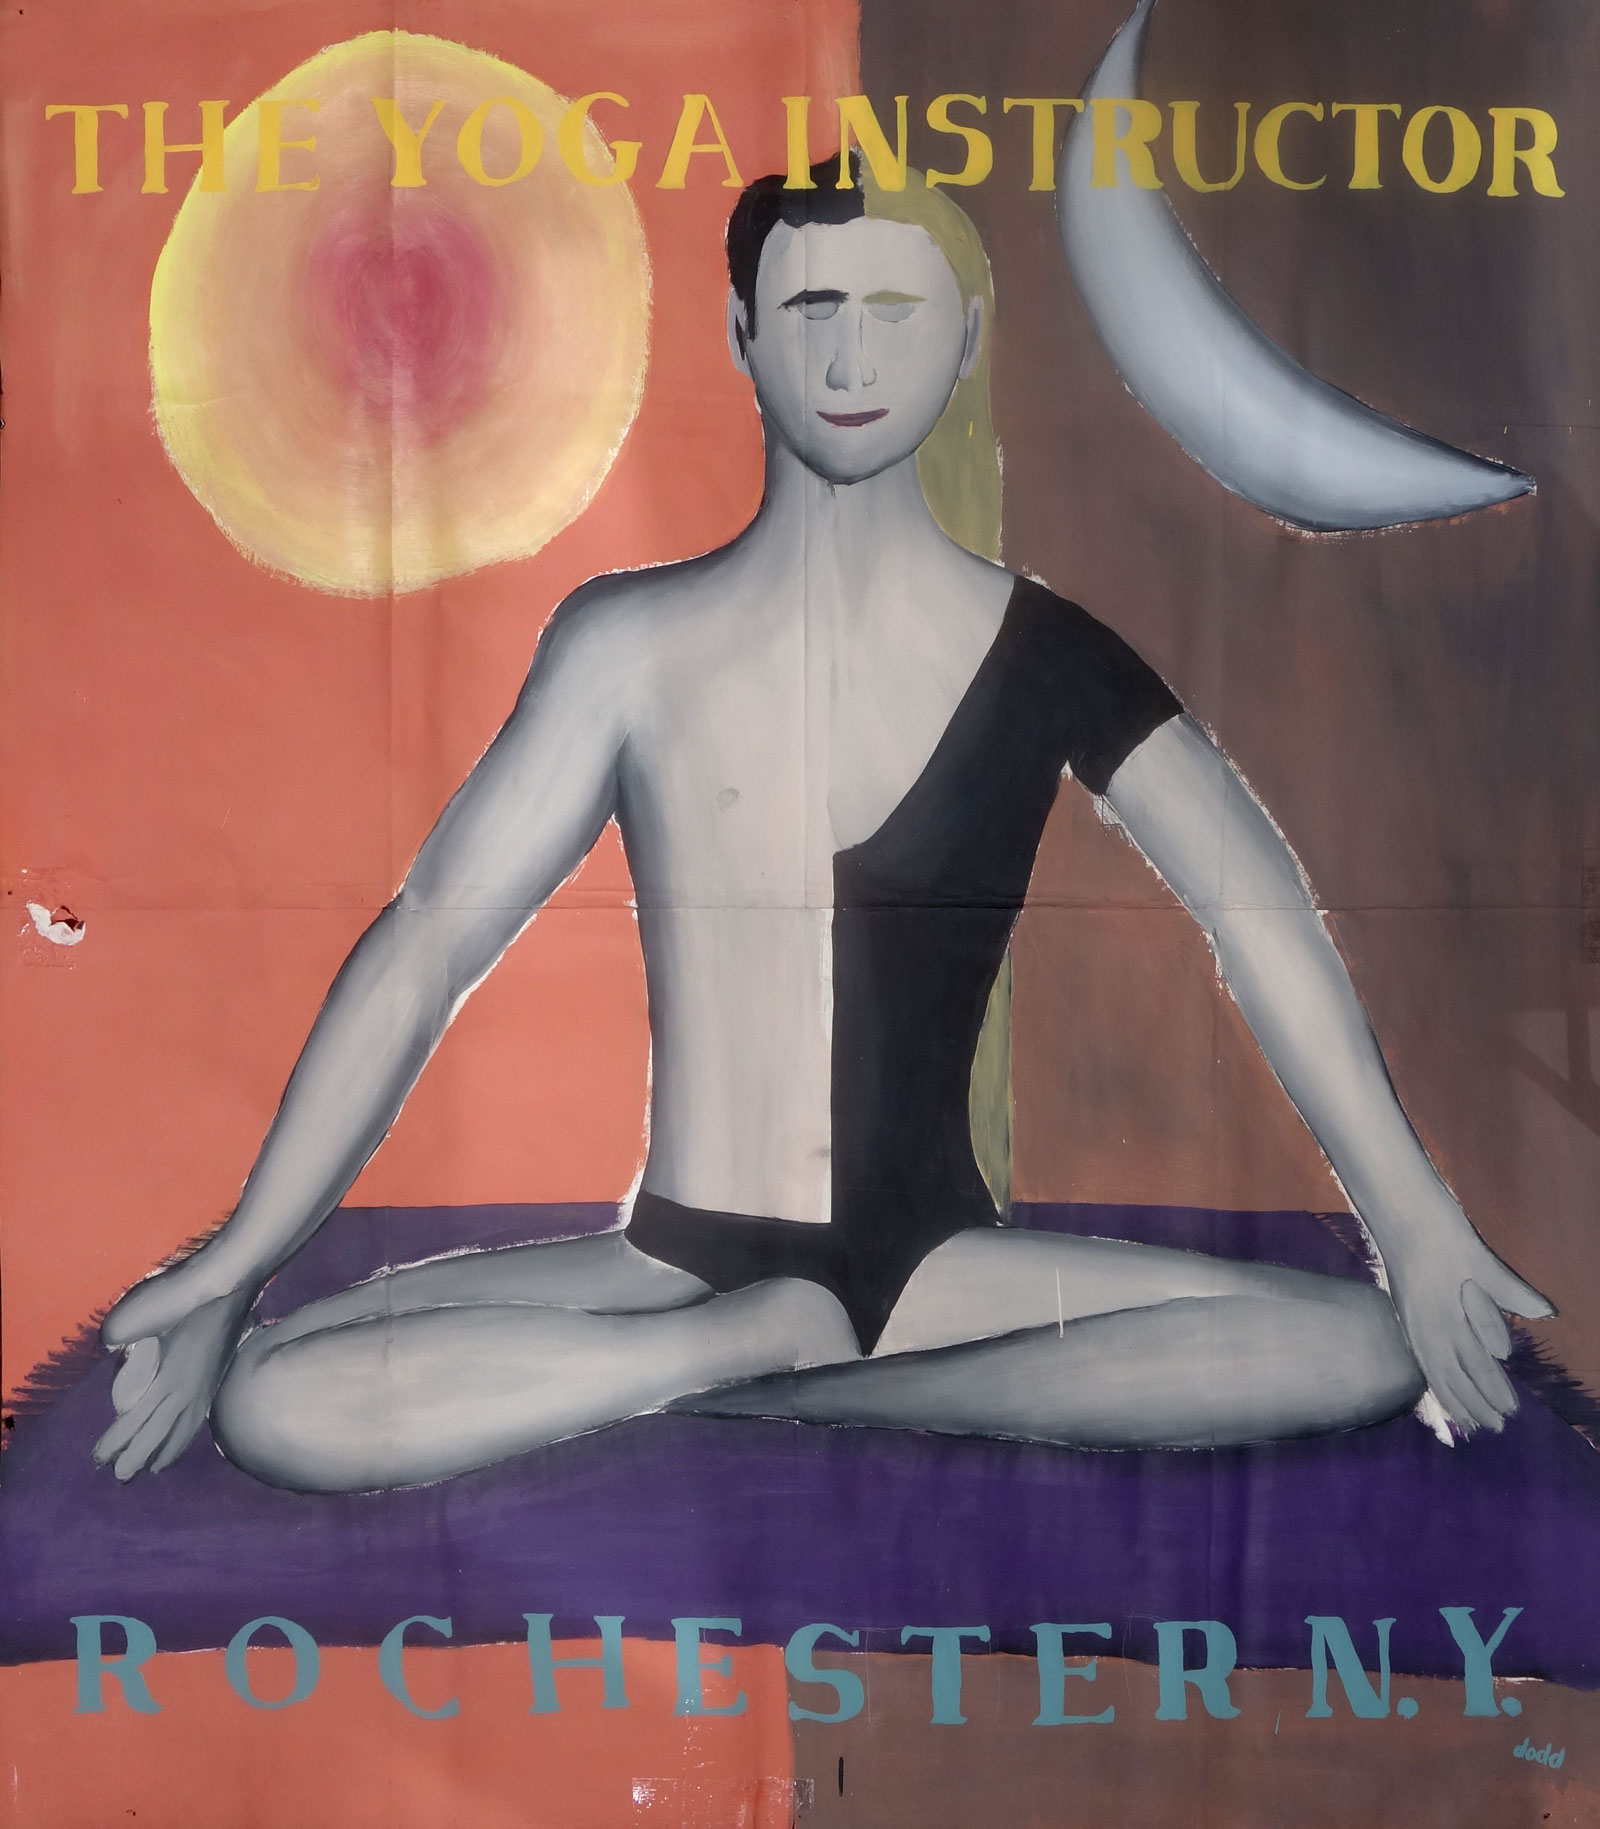 The Yoga Instructor (Suzanne "Gypsy" Linsky) from the "Community Icons" series by Paul Dodd. Acrylic house paint on billboard paper, 54" wide by "60" high, 1989